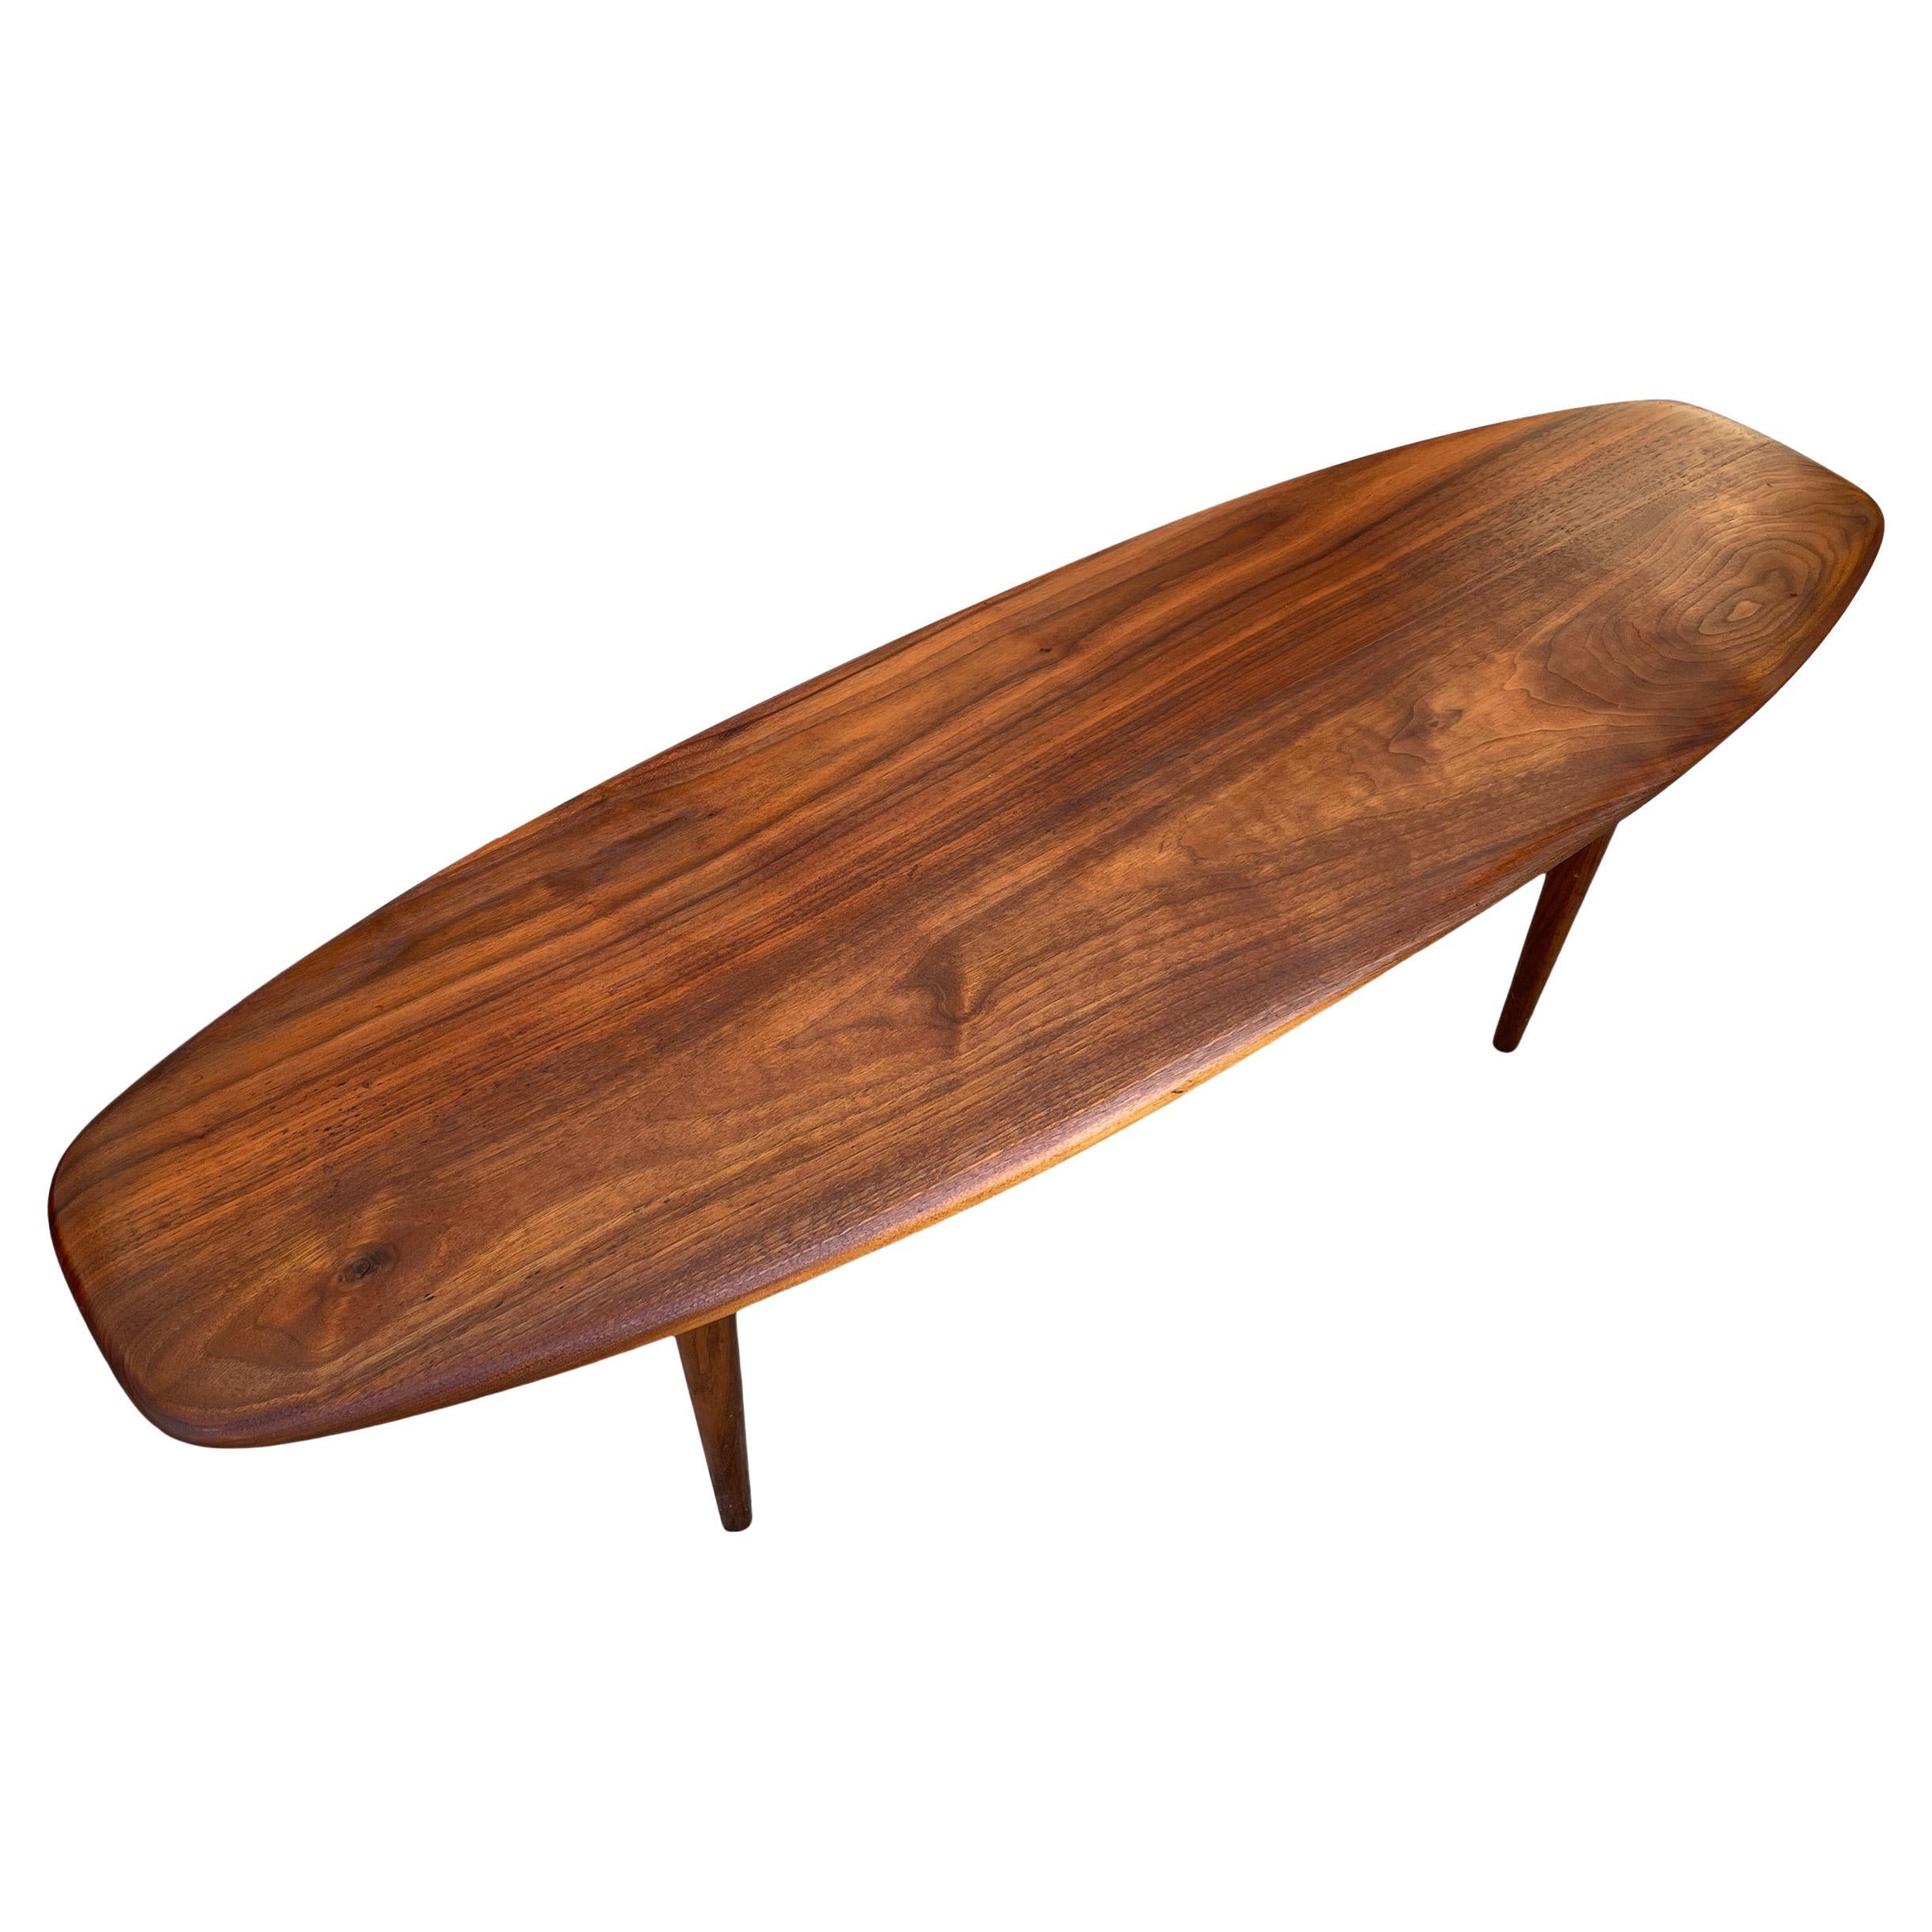 Mid-Century Modern Studio Craft small surfboard shaped solid walnut coffee table. Hand made Circa 1960s American Studio Craft Black Walnut Surfboard shaped coffee table. In the style of Phillip Lloyd Powell woodworker. Located in Brooklyn NYC.